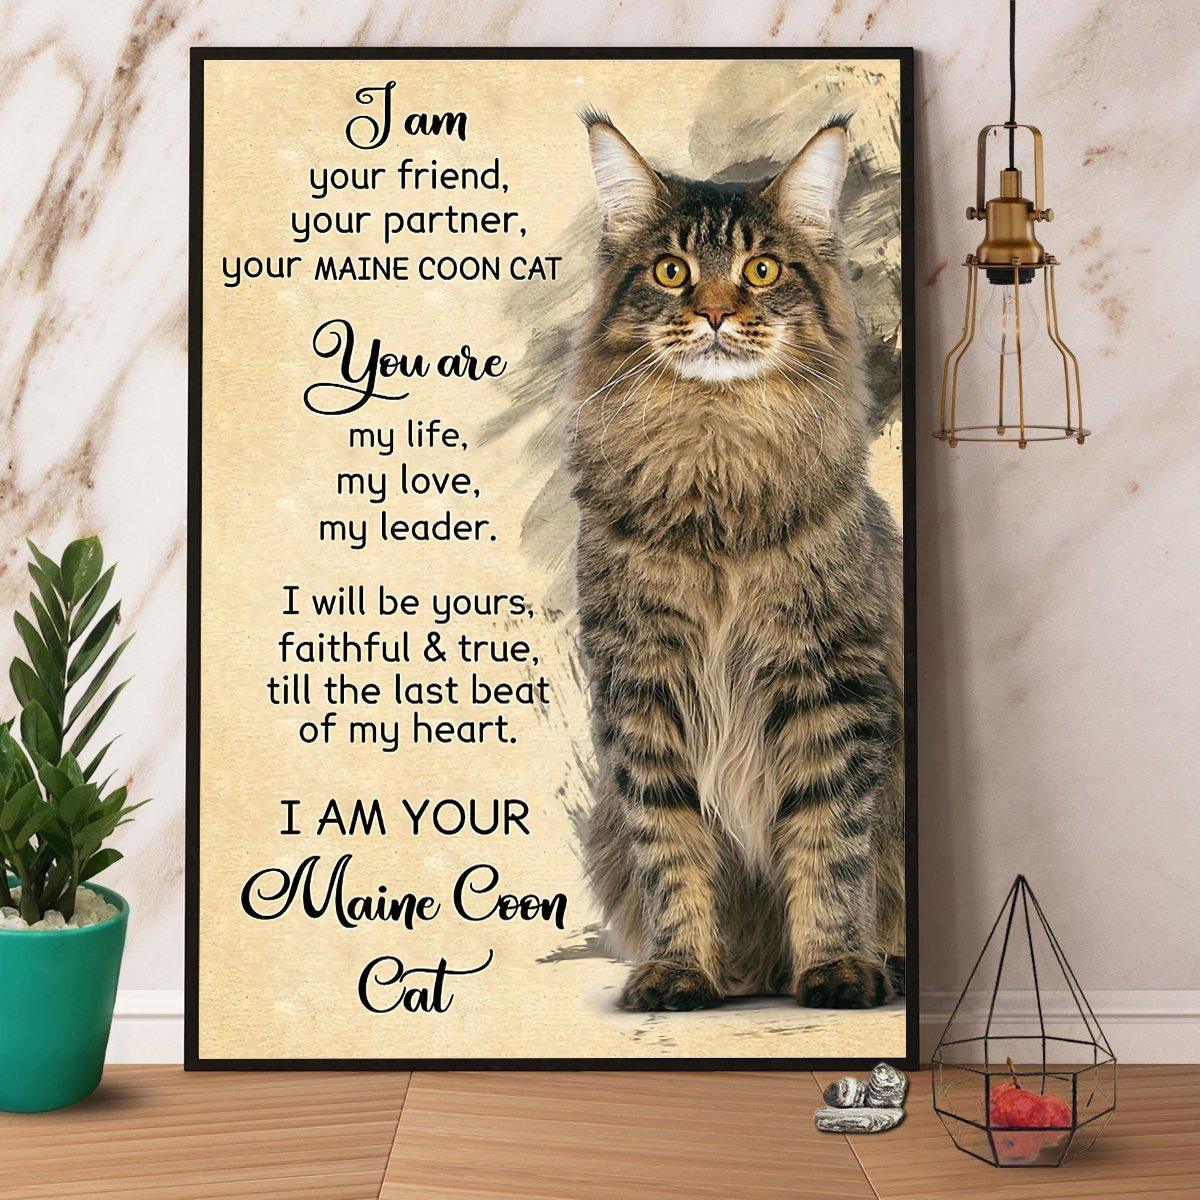 Maine Coon Cat Portrait Canvas For Son - I Am Your Friend, Your Partner, Your Maine Coon Cat Canvas, Perfect Gift For Maine Coon Lover, Cat Lover - Amzanimalsgift